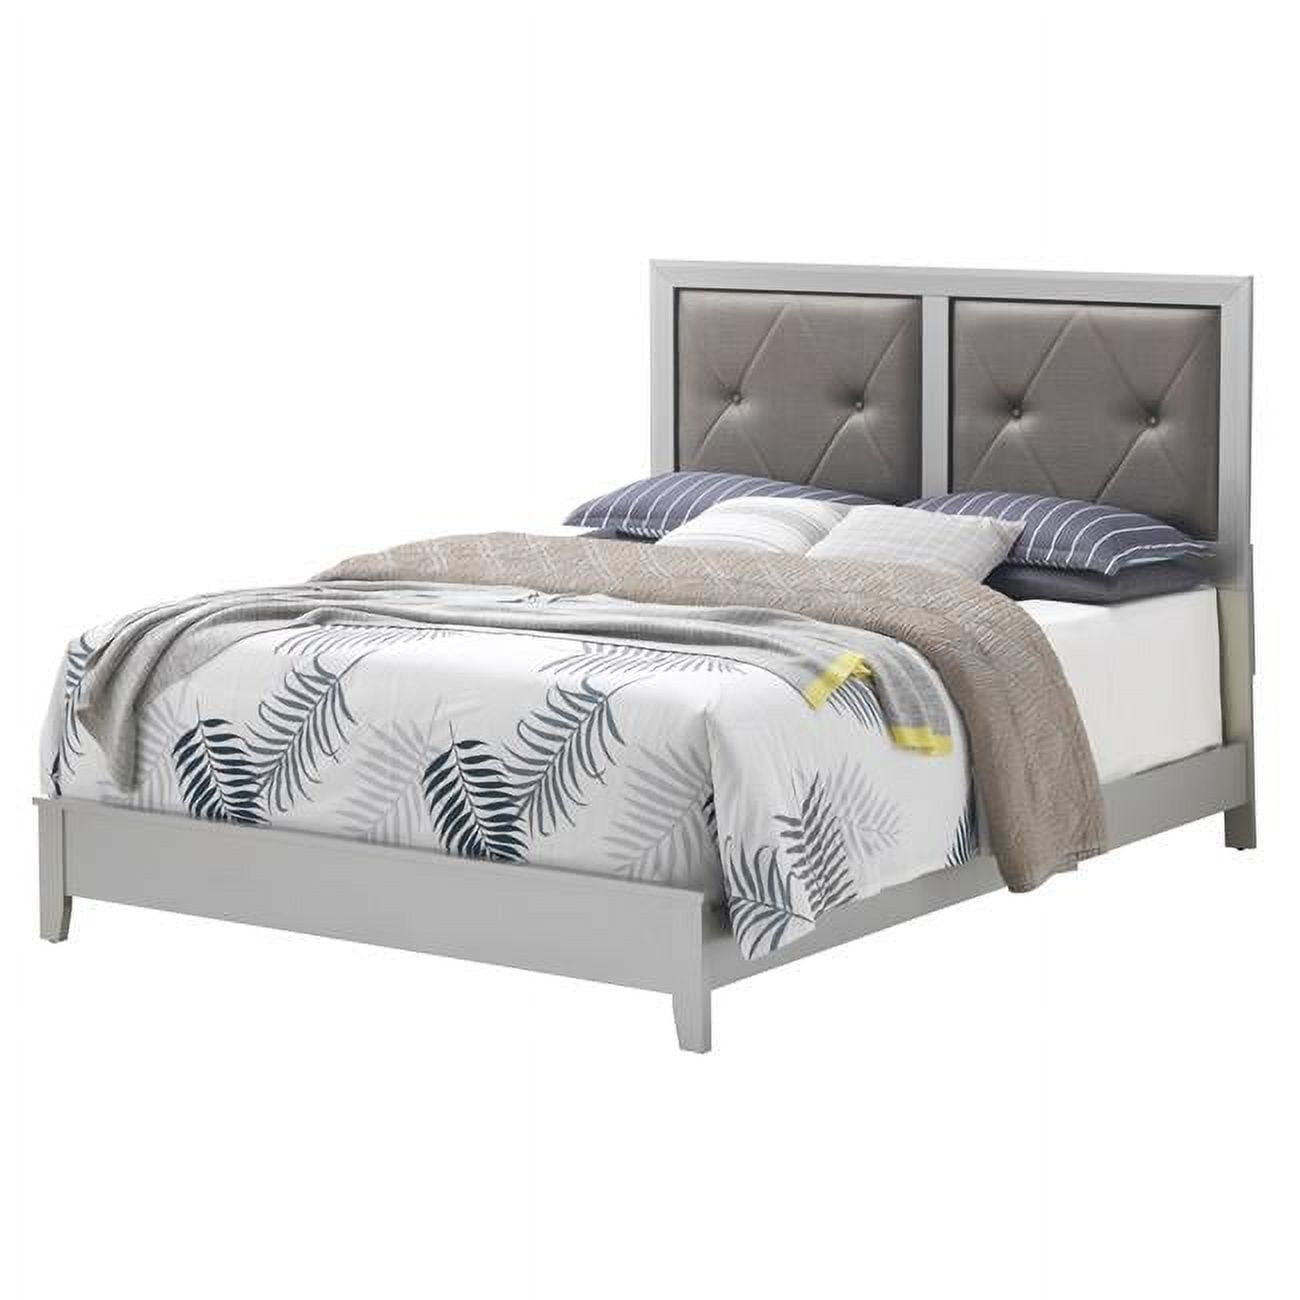 PF-G1333A-QB Primo Upholstered Panel Bed, Silver Champagne - Queen Size -  Passion Furniture